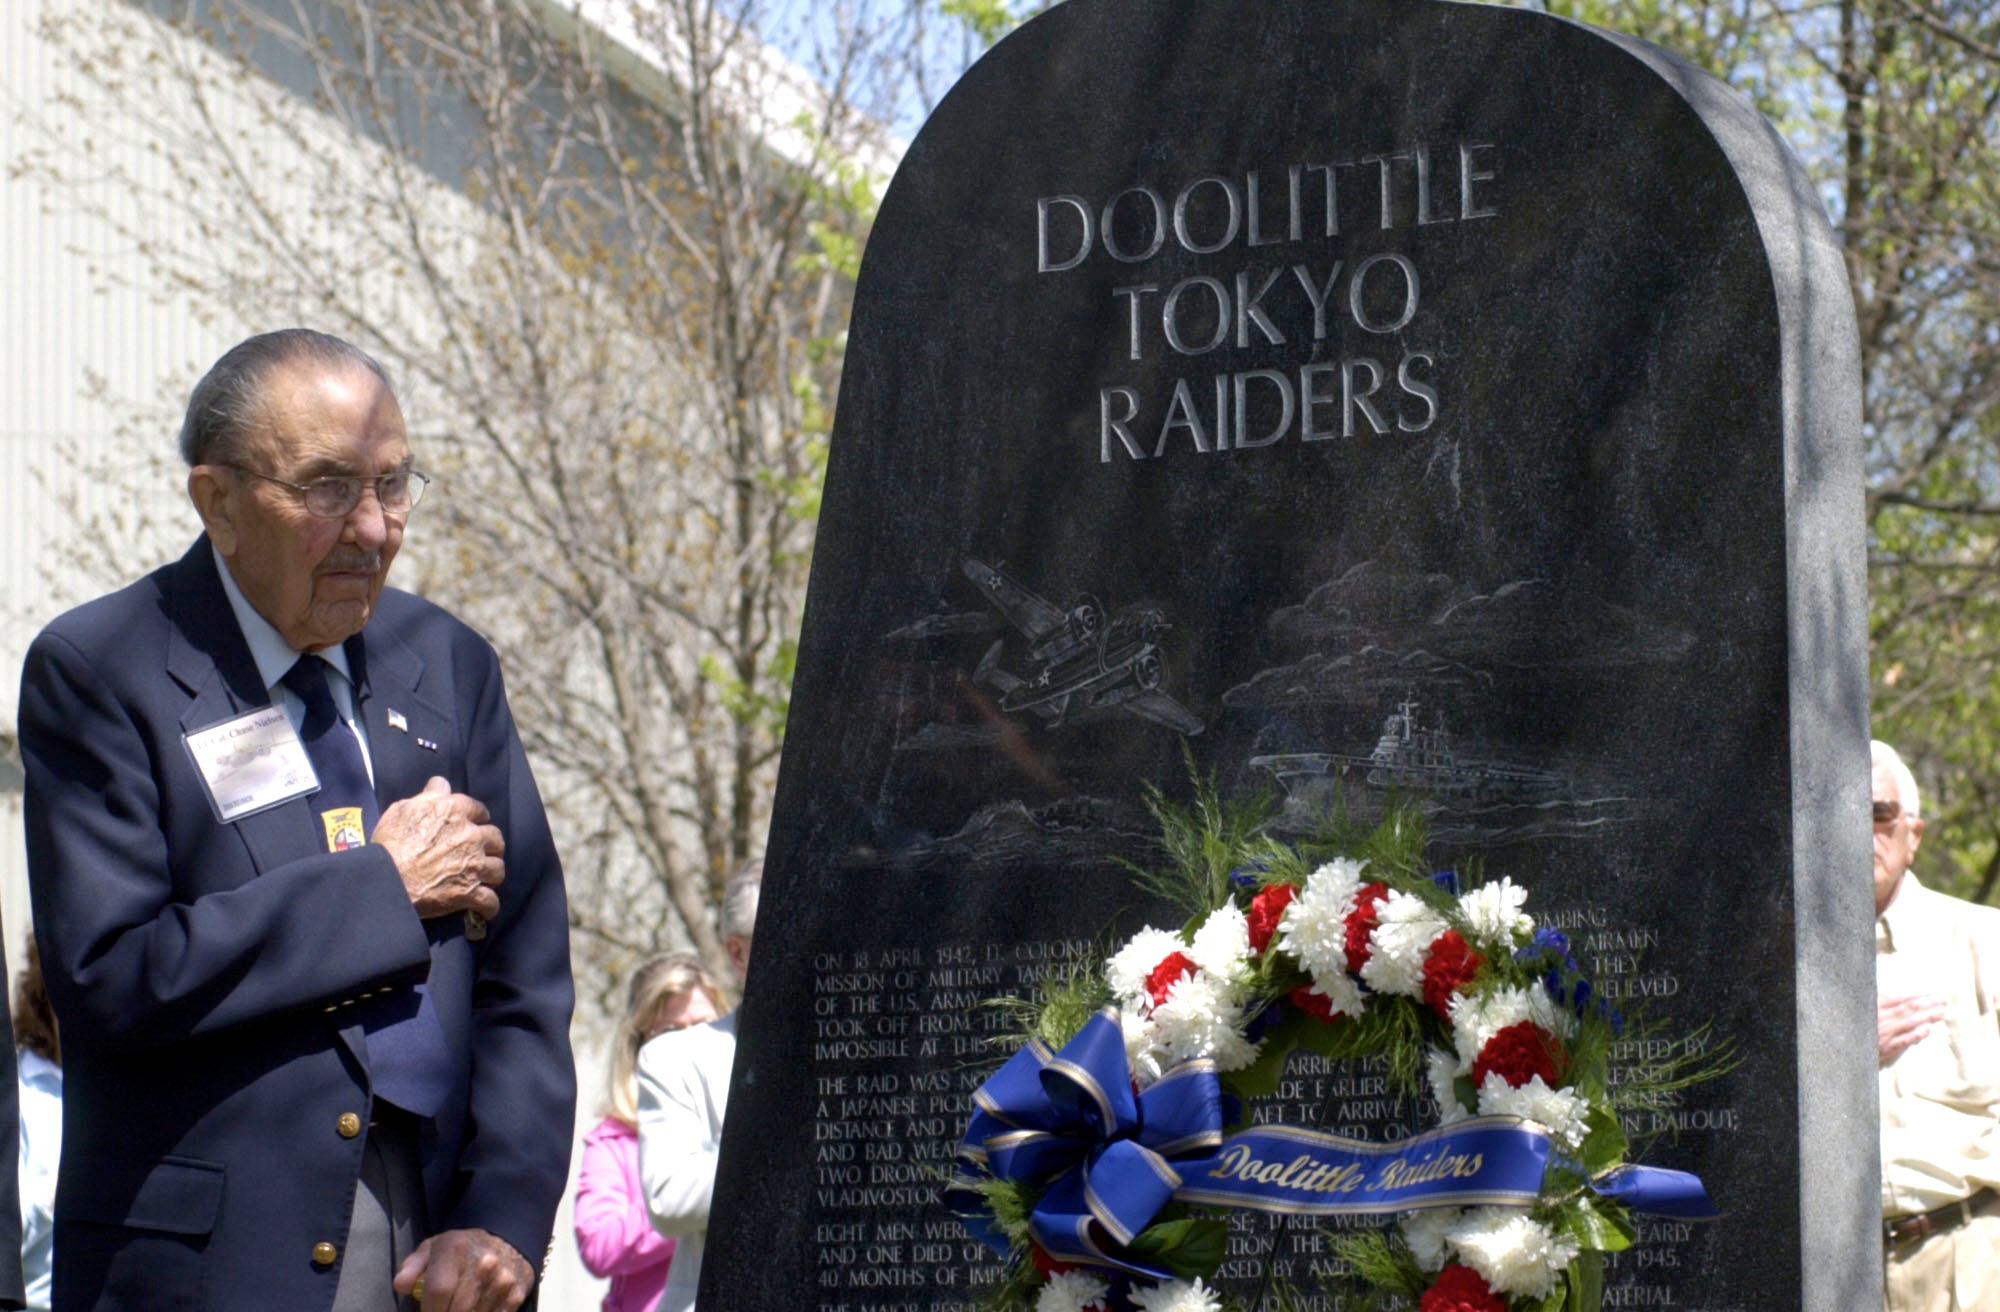 Lt. Col. (Ret.) Chase Nielsen stands for the playing of taps after a wreath was placed near the Doolittle Tokyo Raiders memorial at the National Museum of the U. S. Air Force, DAYTON, Ohio, April 18, 2006. The ceremony was held to recognize the achievements of the Raiders on the 64th anniversary of the mission over Tokyo, Japan. (U.S. Air Force photo)